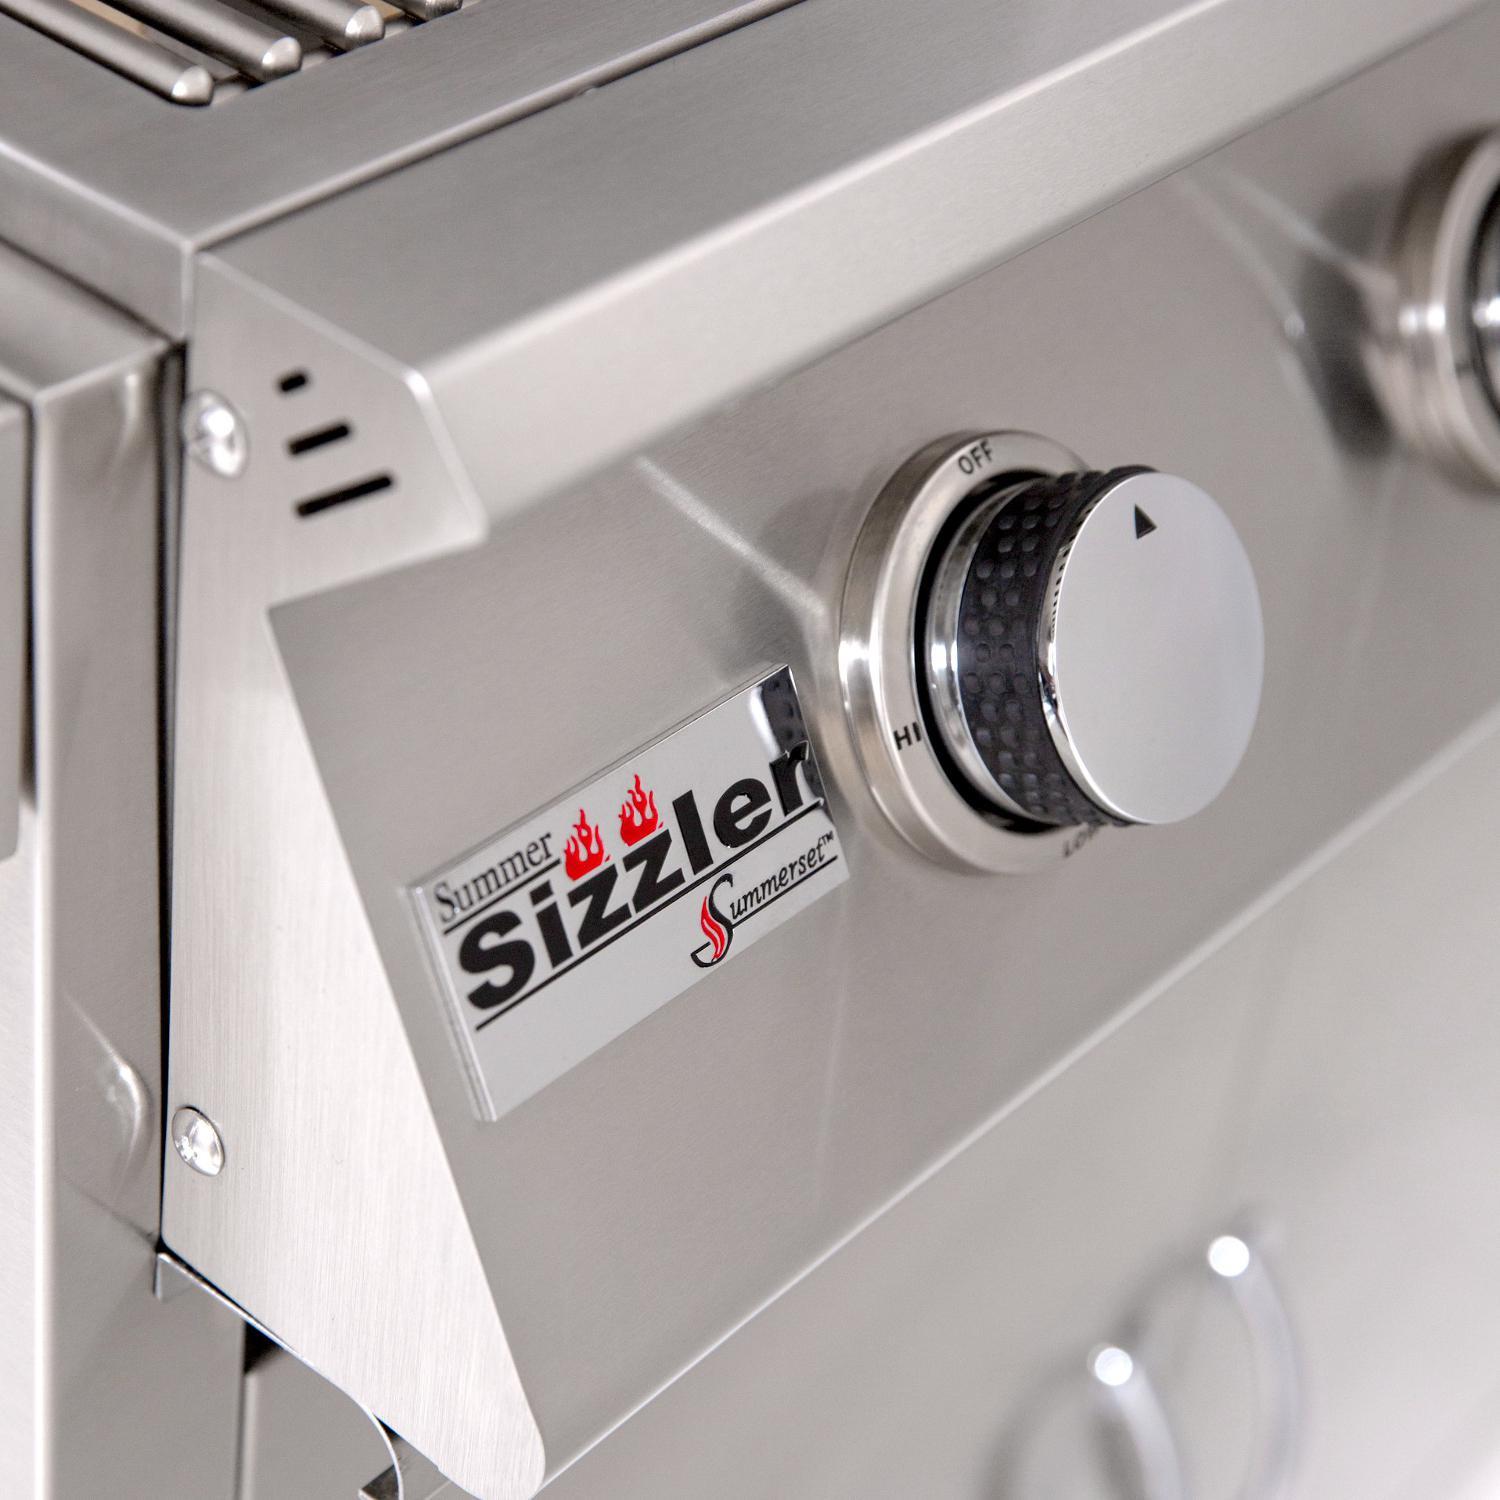 Summerset Grills Grills Sizzler Grill, 40" LP/NG - Built-in